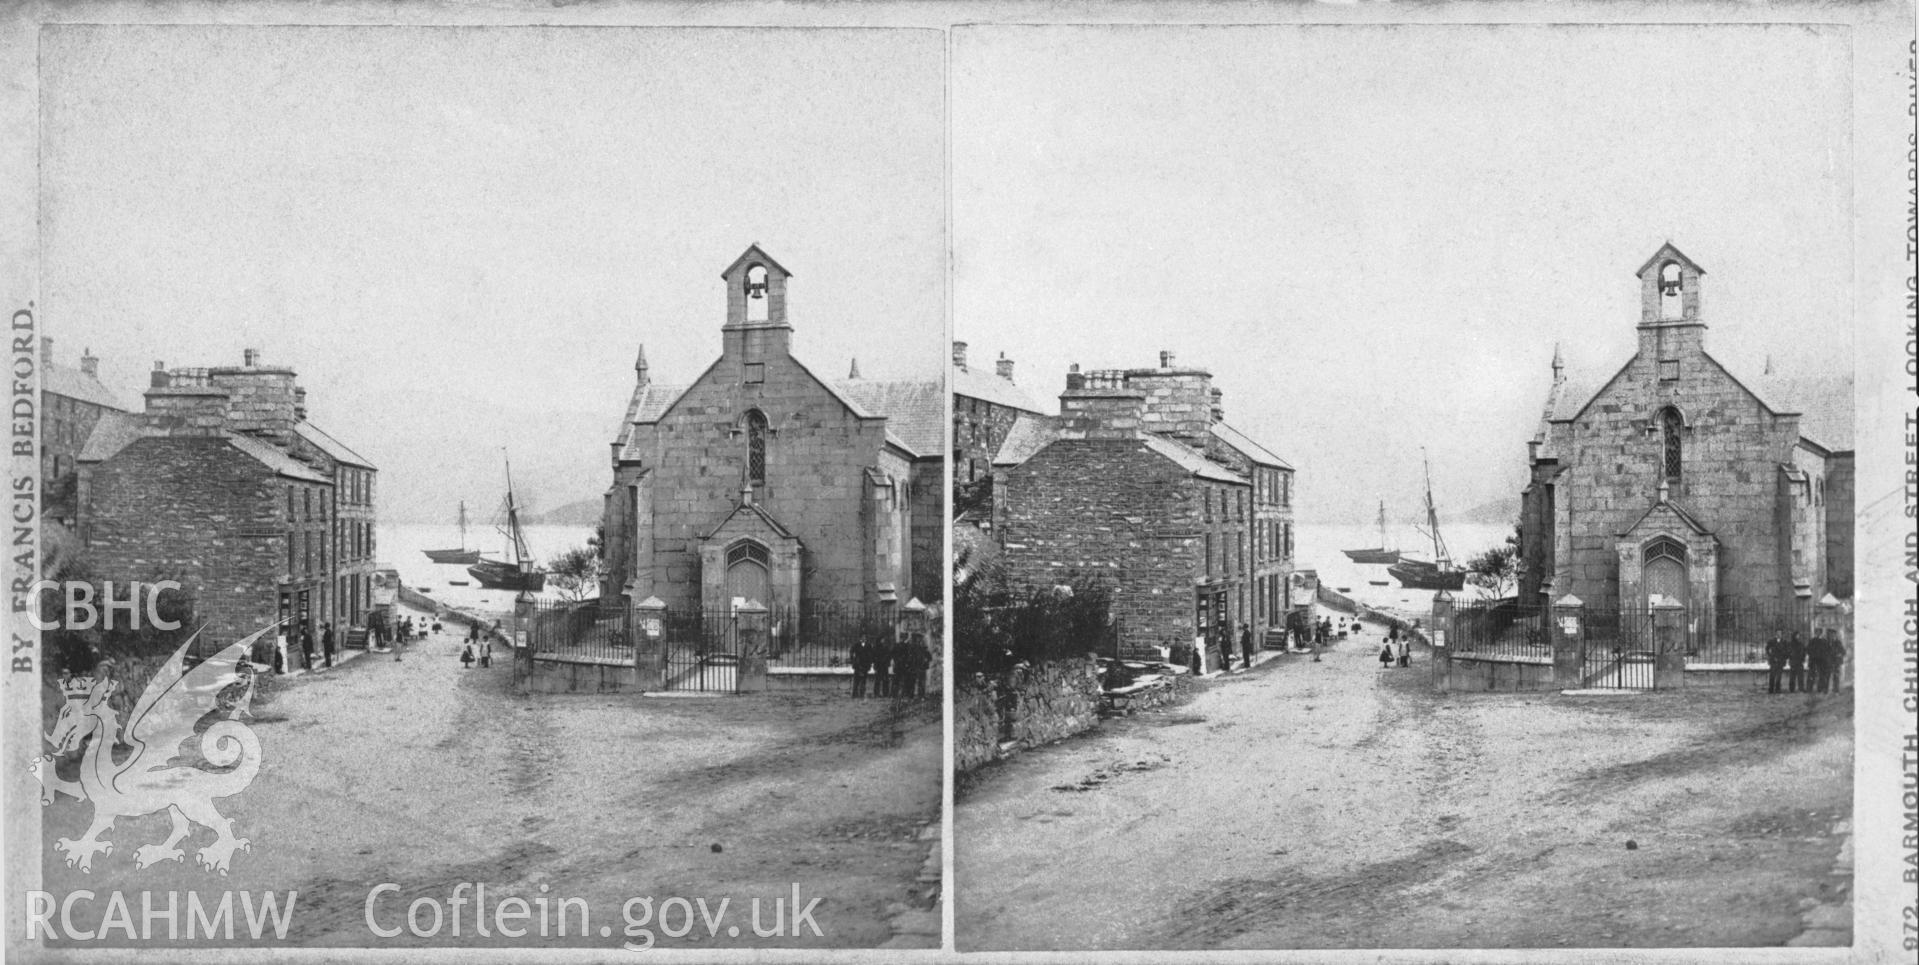 Black and white print of Barmouth showing church and street looking towards the river, copied from an original stereoscopic print in the possession of Thomas Lloyd. Negative held.